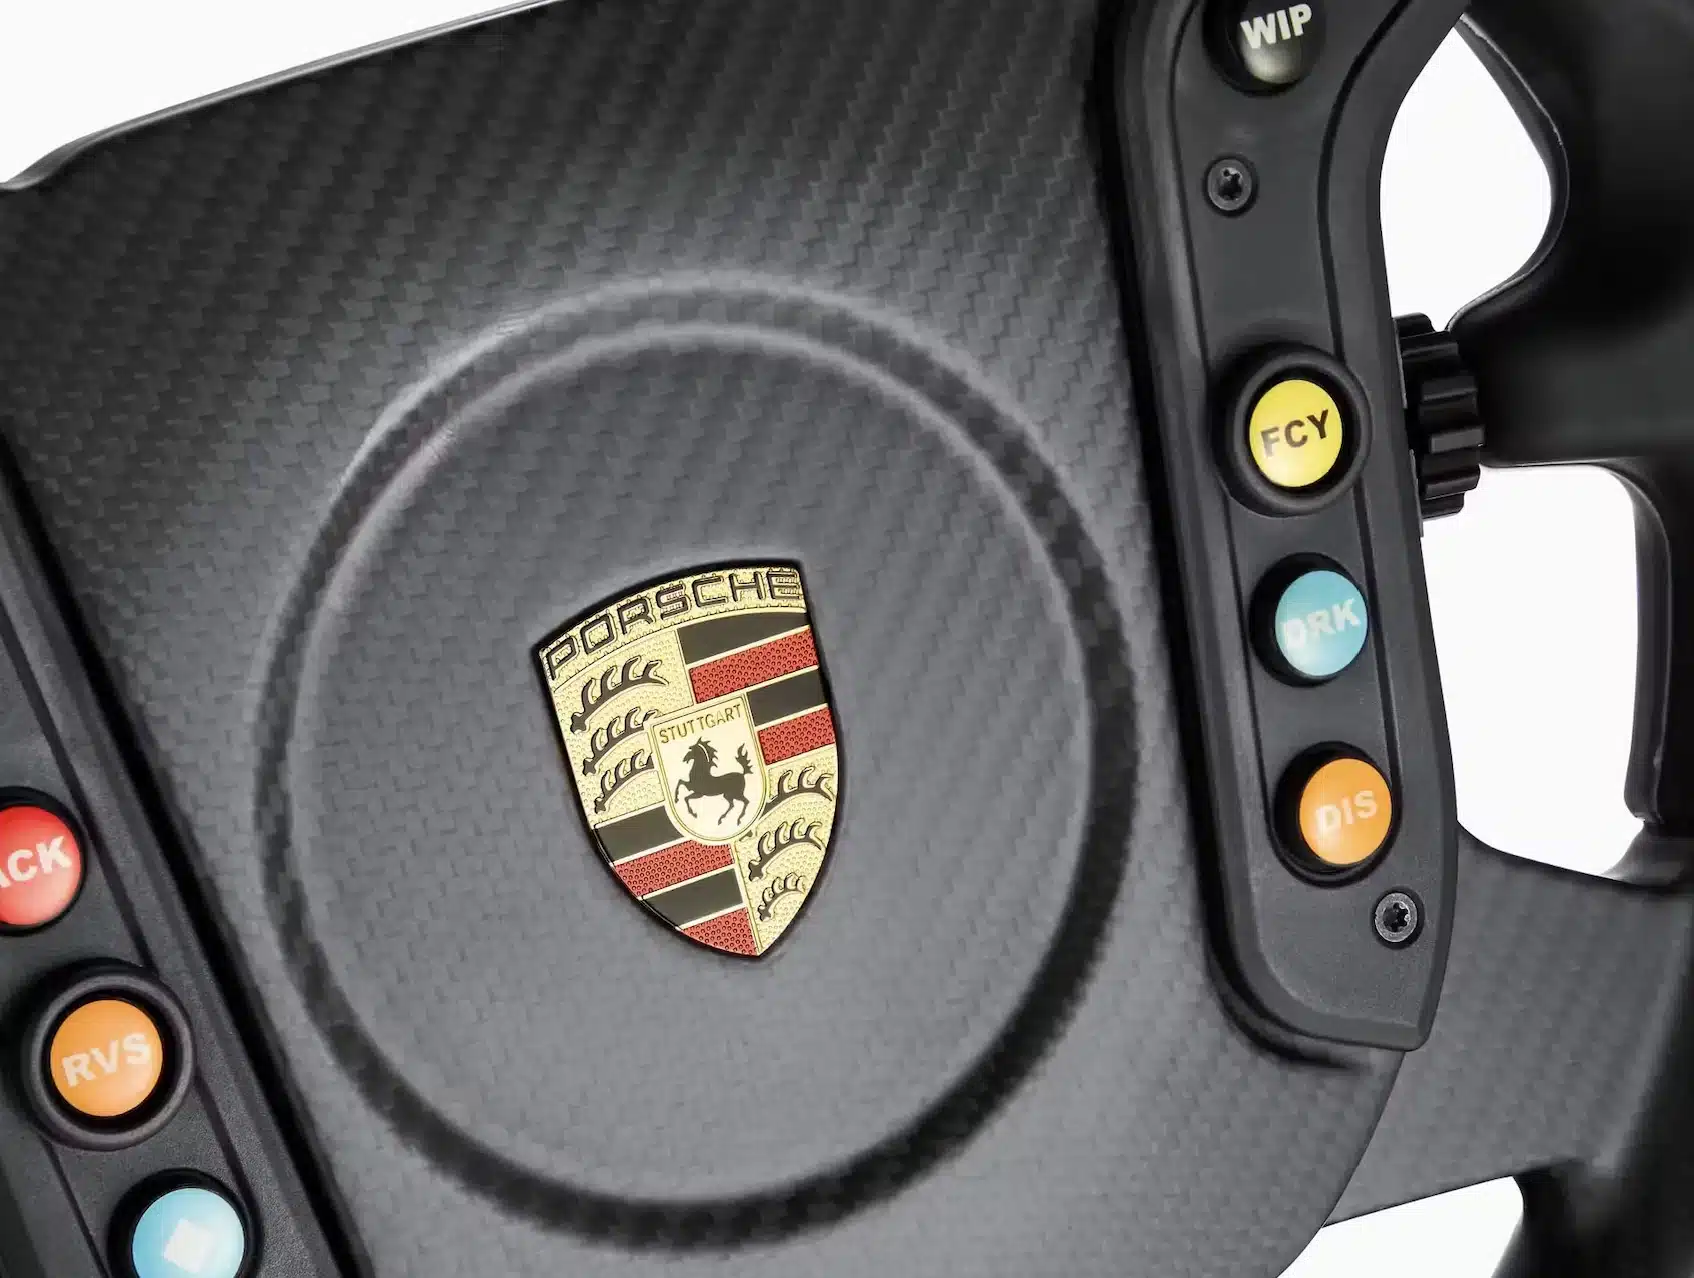 This is the world's most expensive sim racing wheel